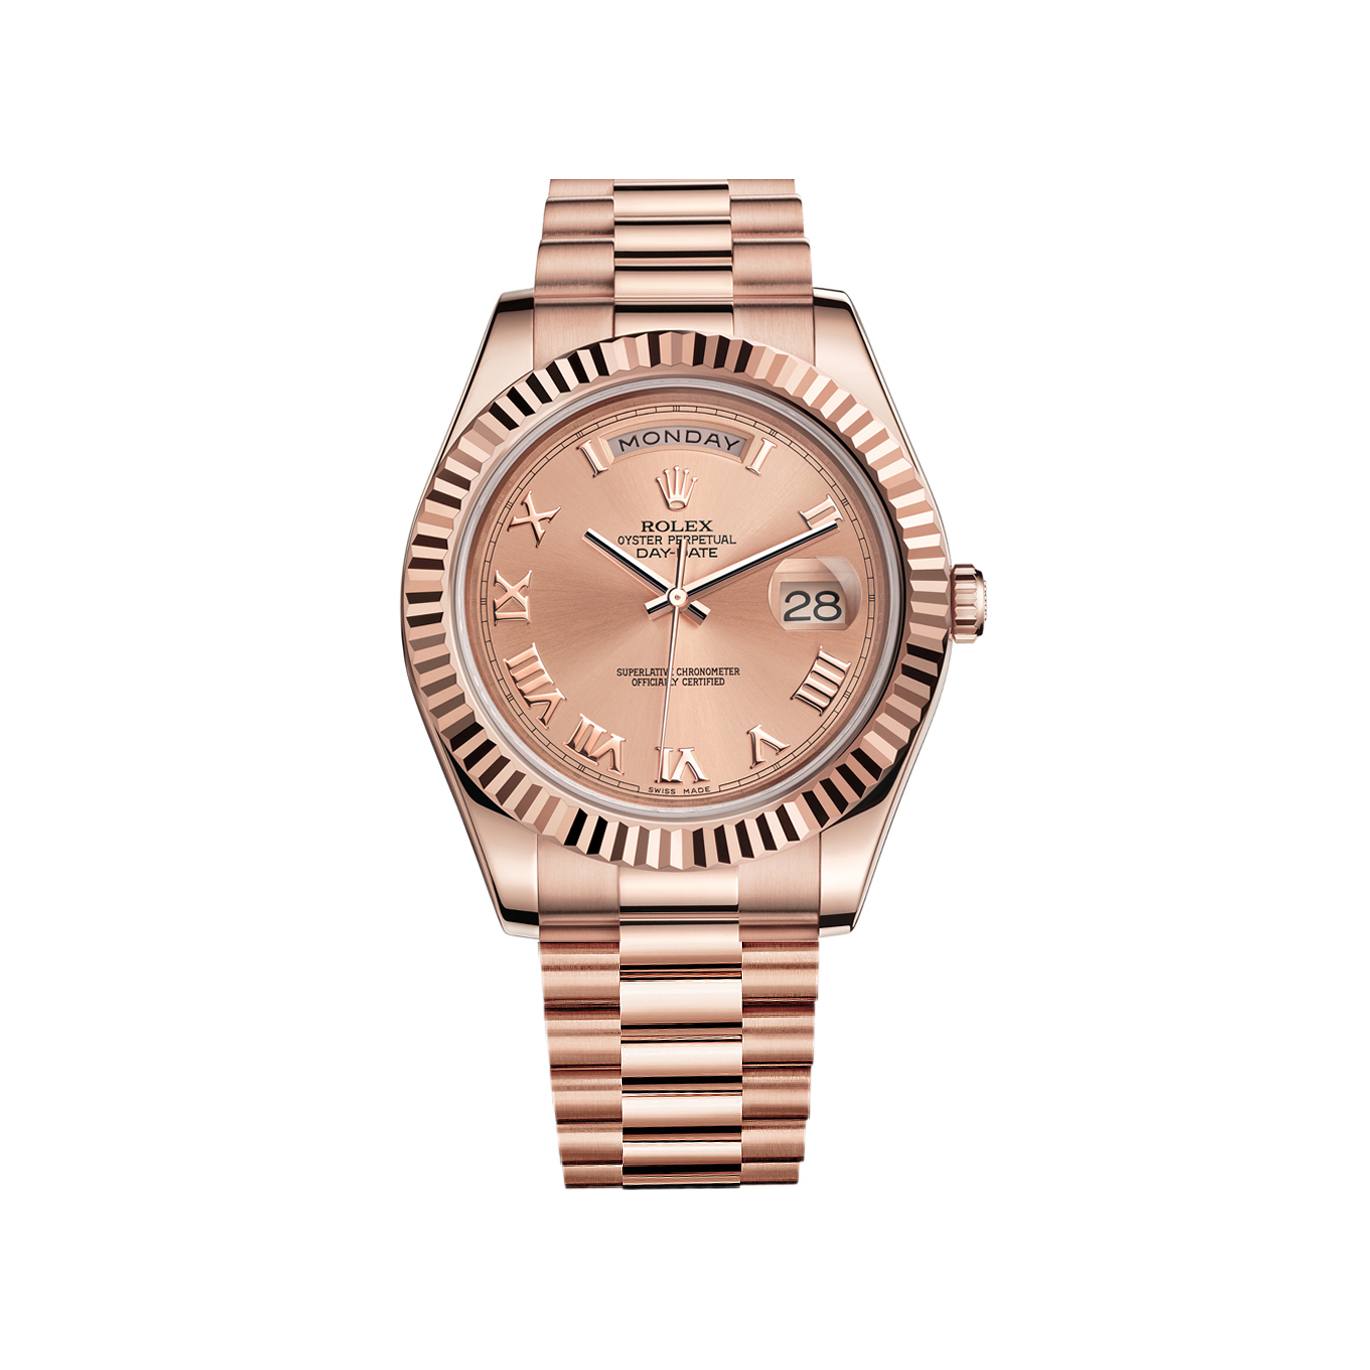 Day-Date II 218235 Rose Gold Watch (Pink)